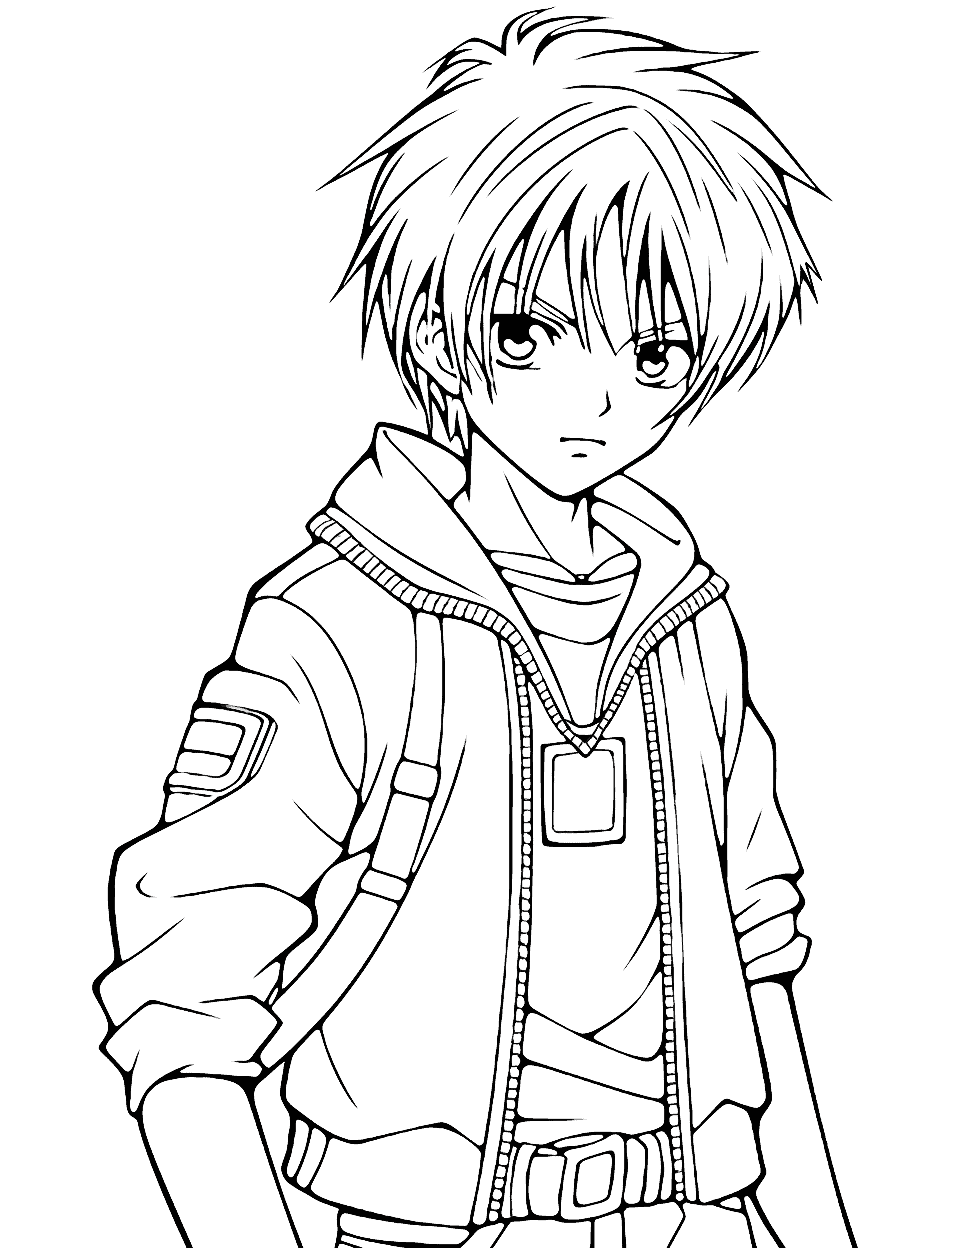 Discover the Best Anime Coloring Pages for Kids - Free Printable-demhanvico.com.vn